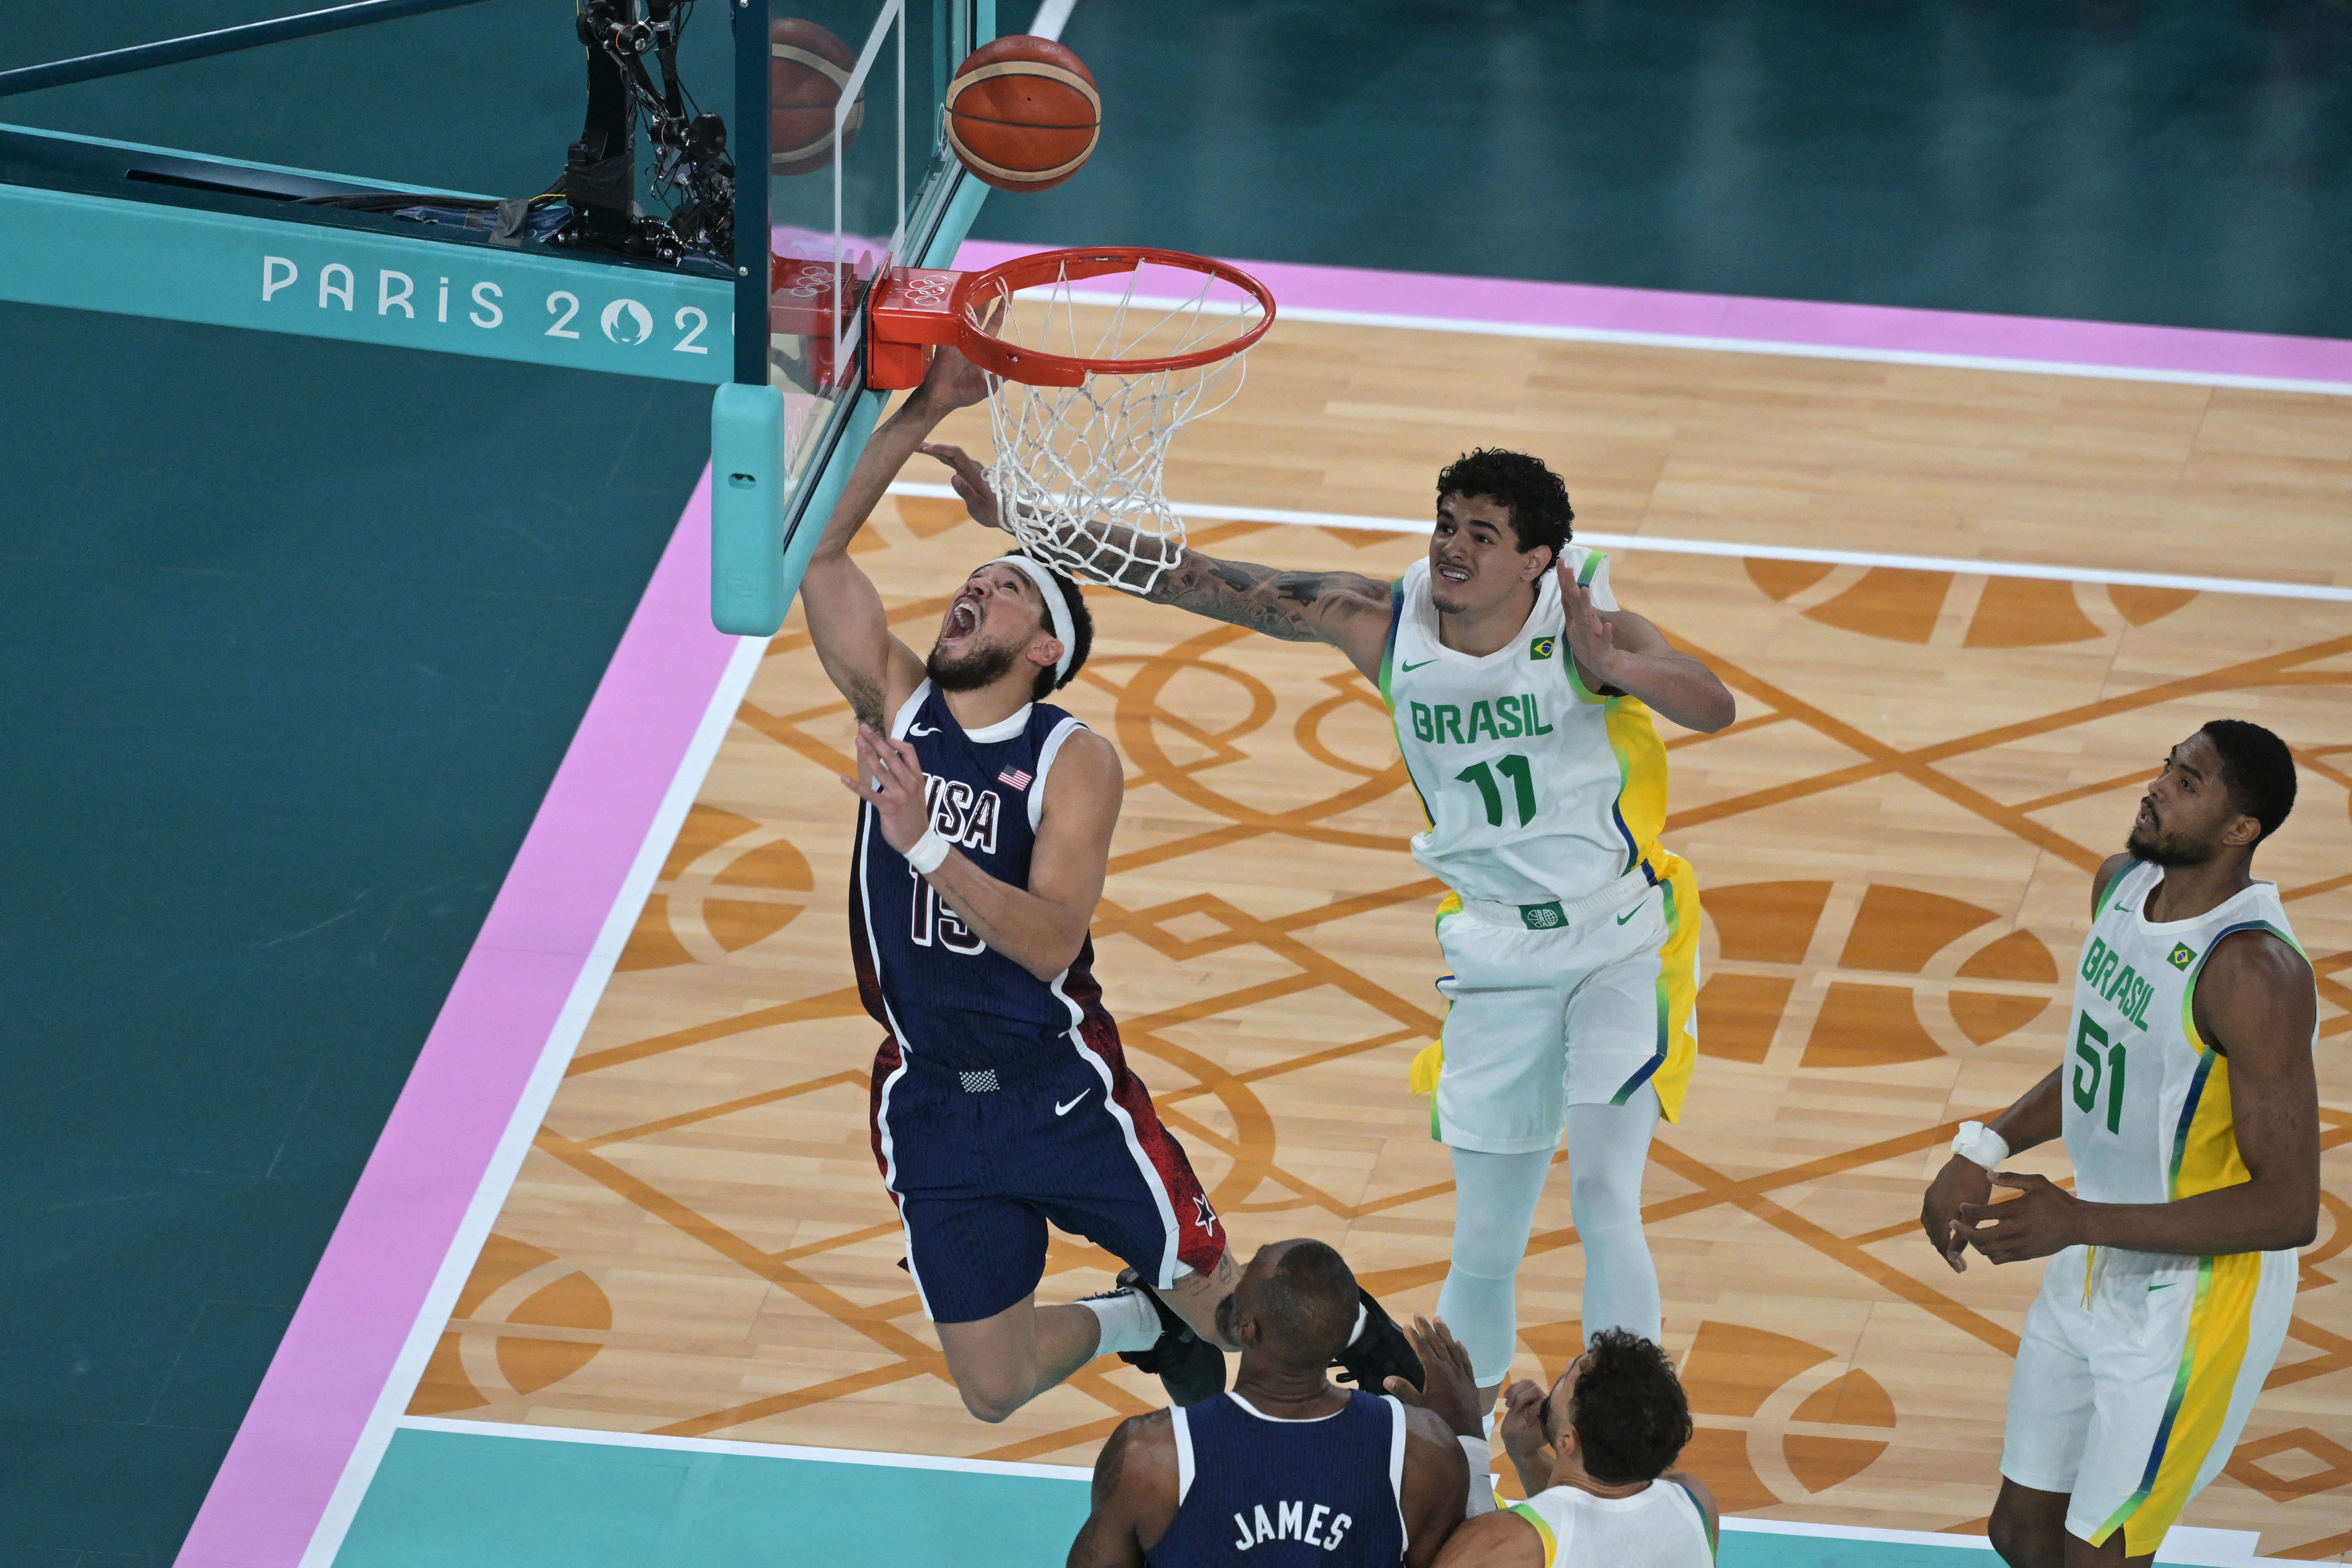 Paris Olympics: Team USA finishes greatest day of basketball ever in one arena by rolling Brazil in quarterfinals